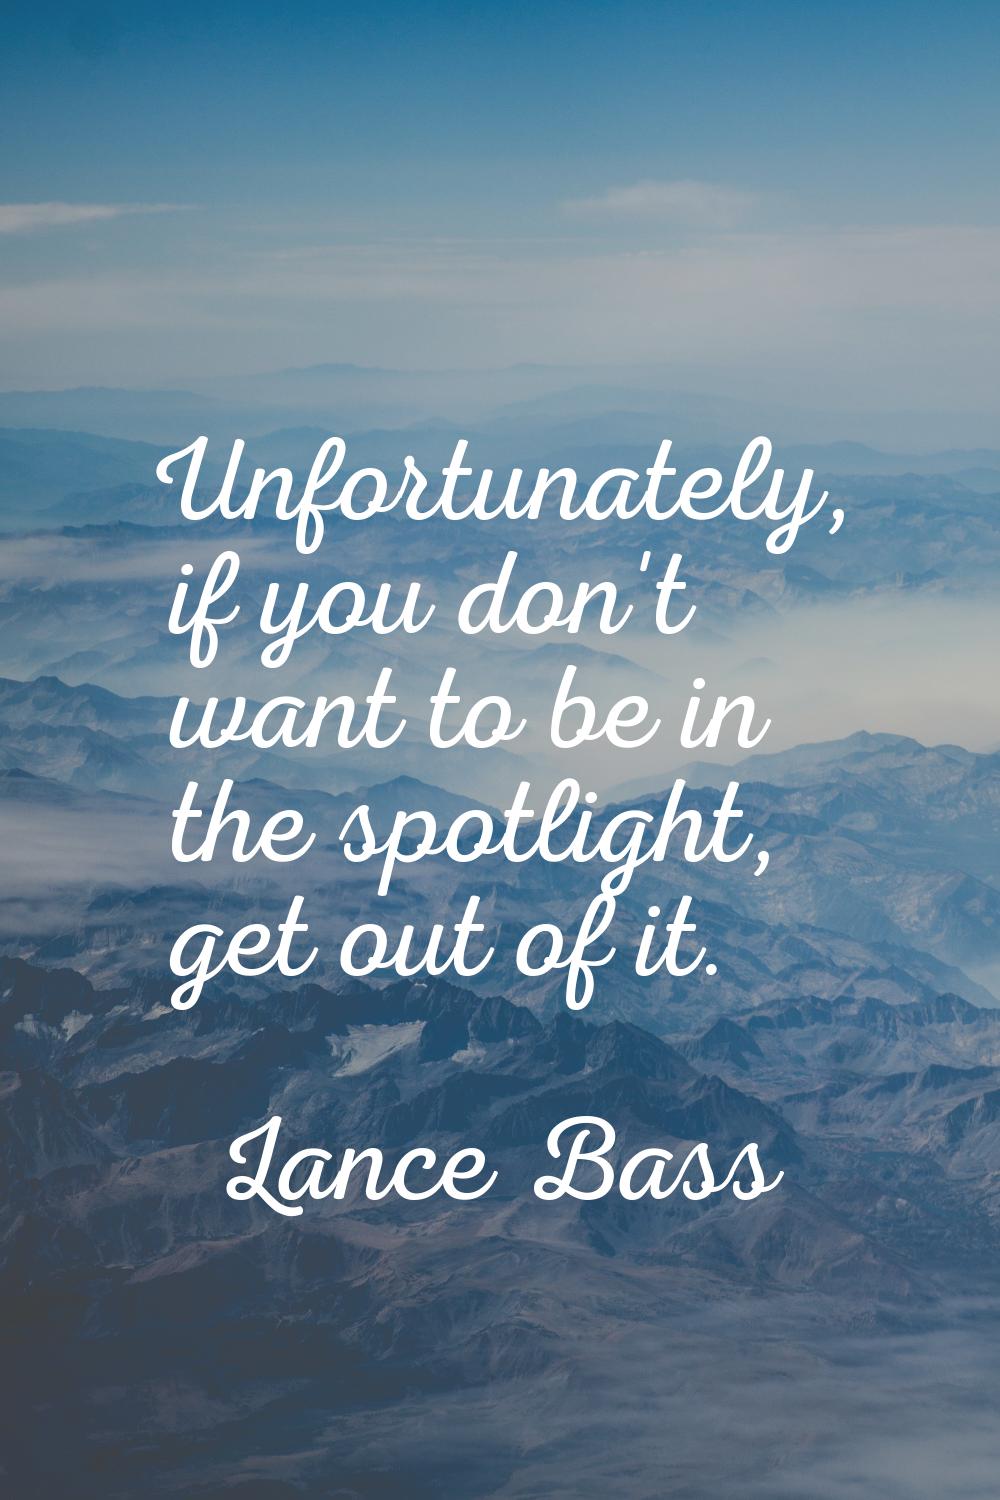 Unfortunately, if you don't want to be in the spotlight, get out of it.